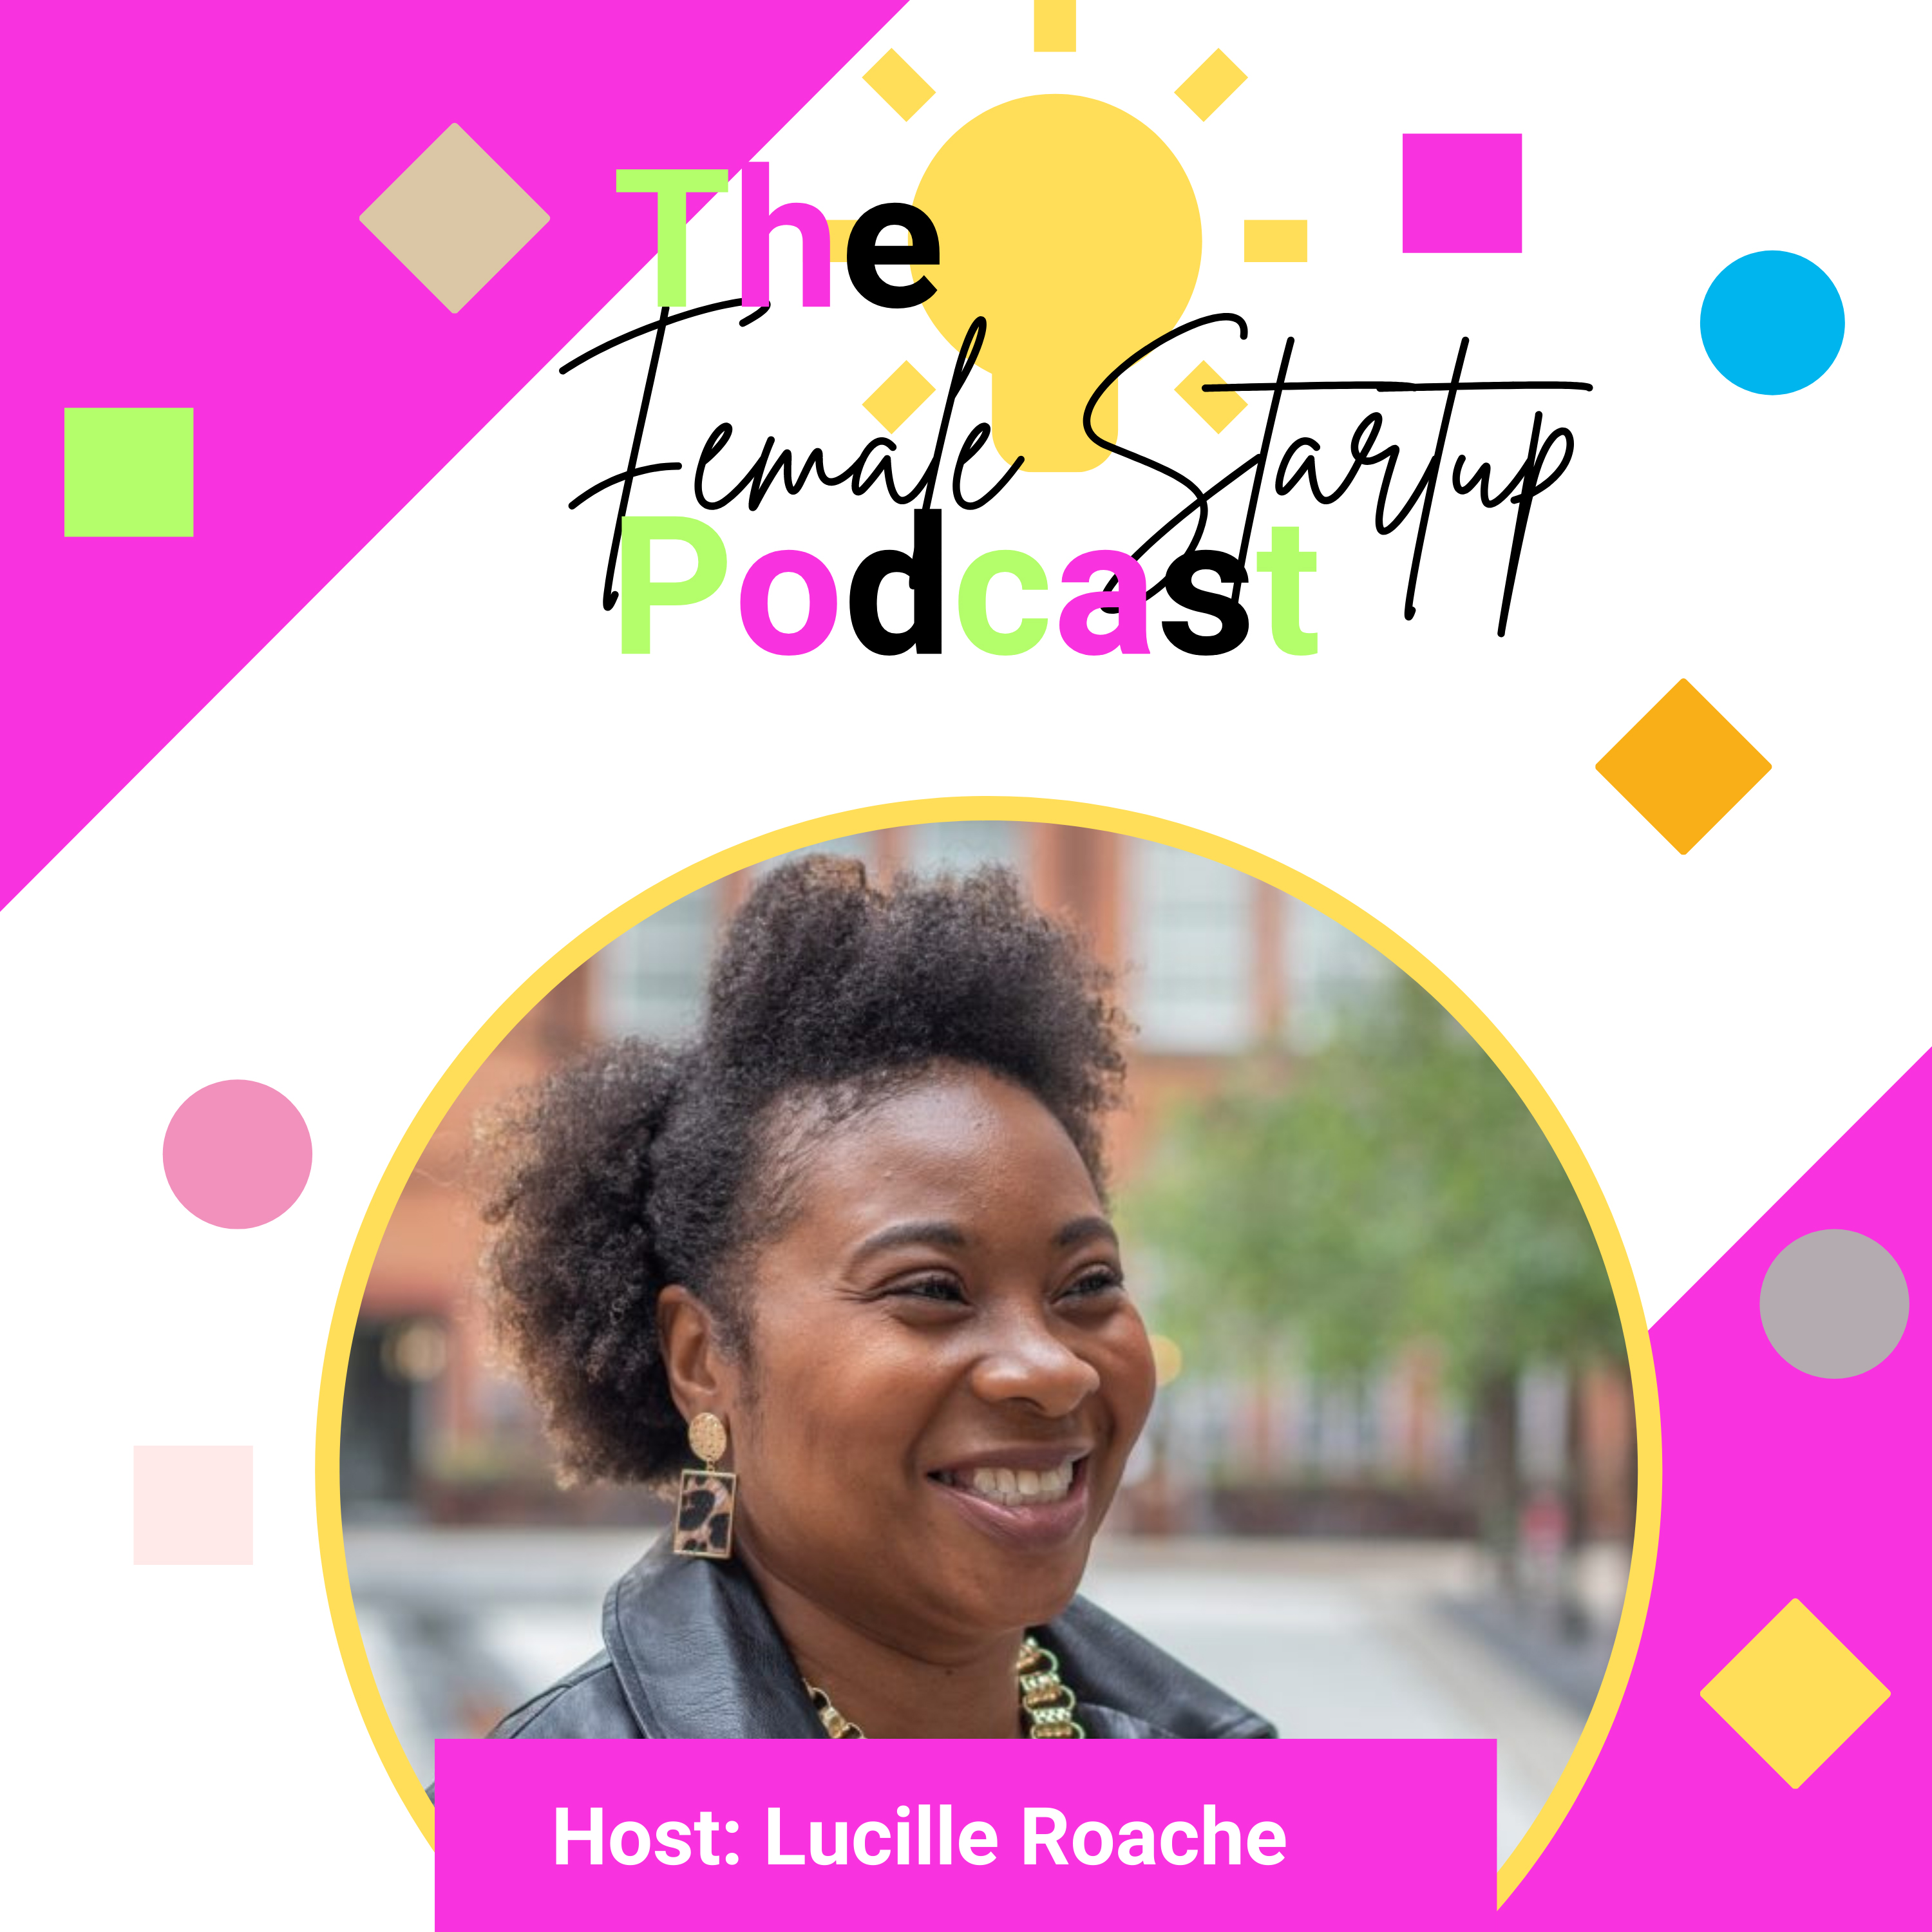 The Female Startup podcast